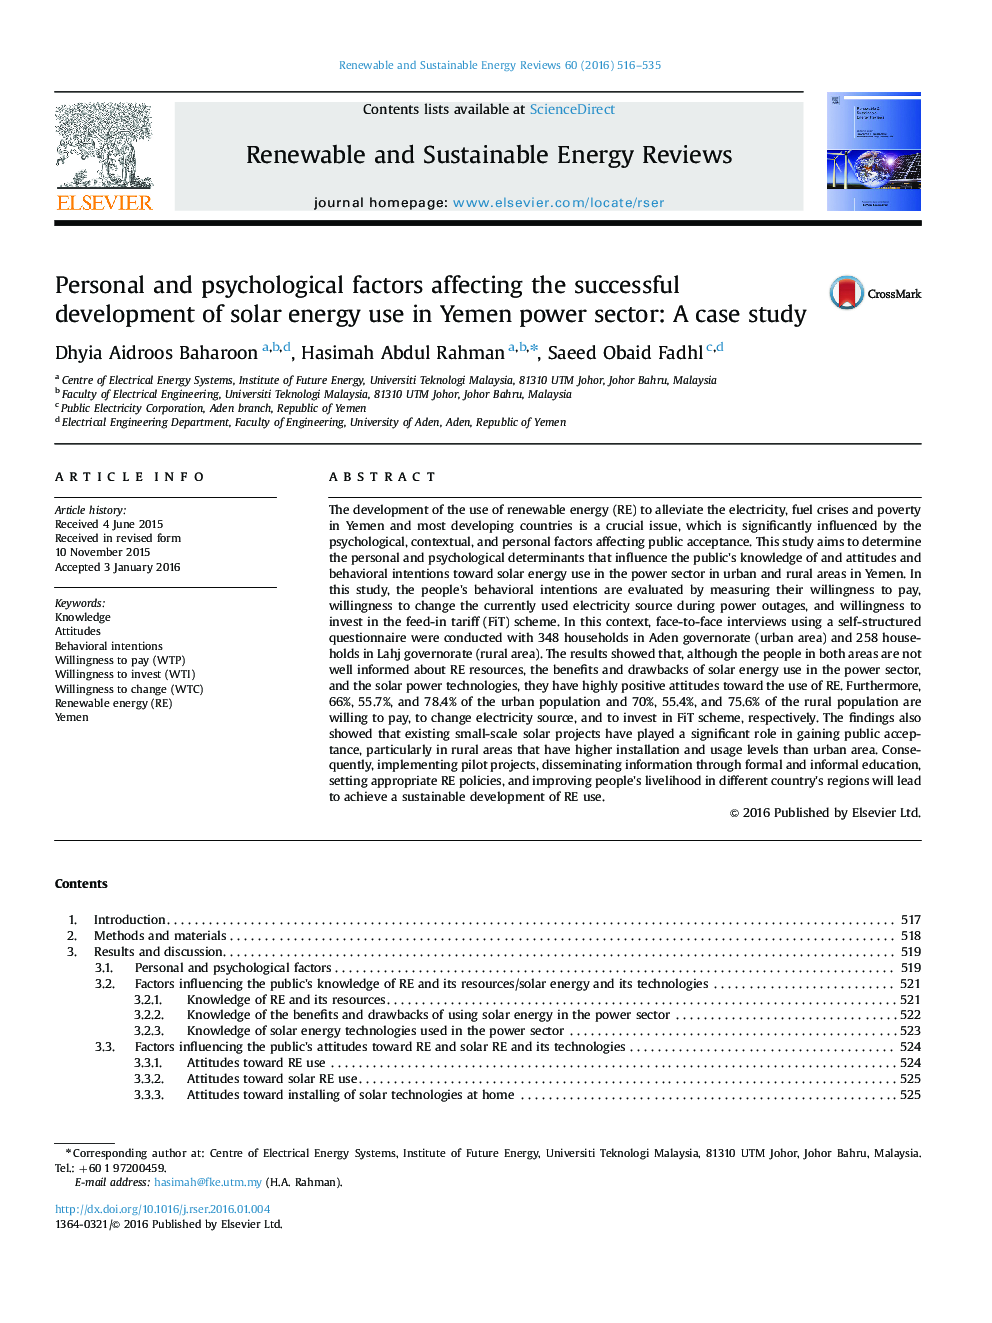 Personal and psychological factors affecting the successful development of solar energy use in Yemen power sector: A case study